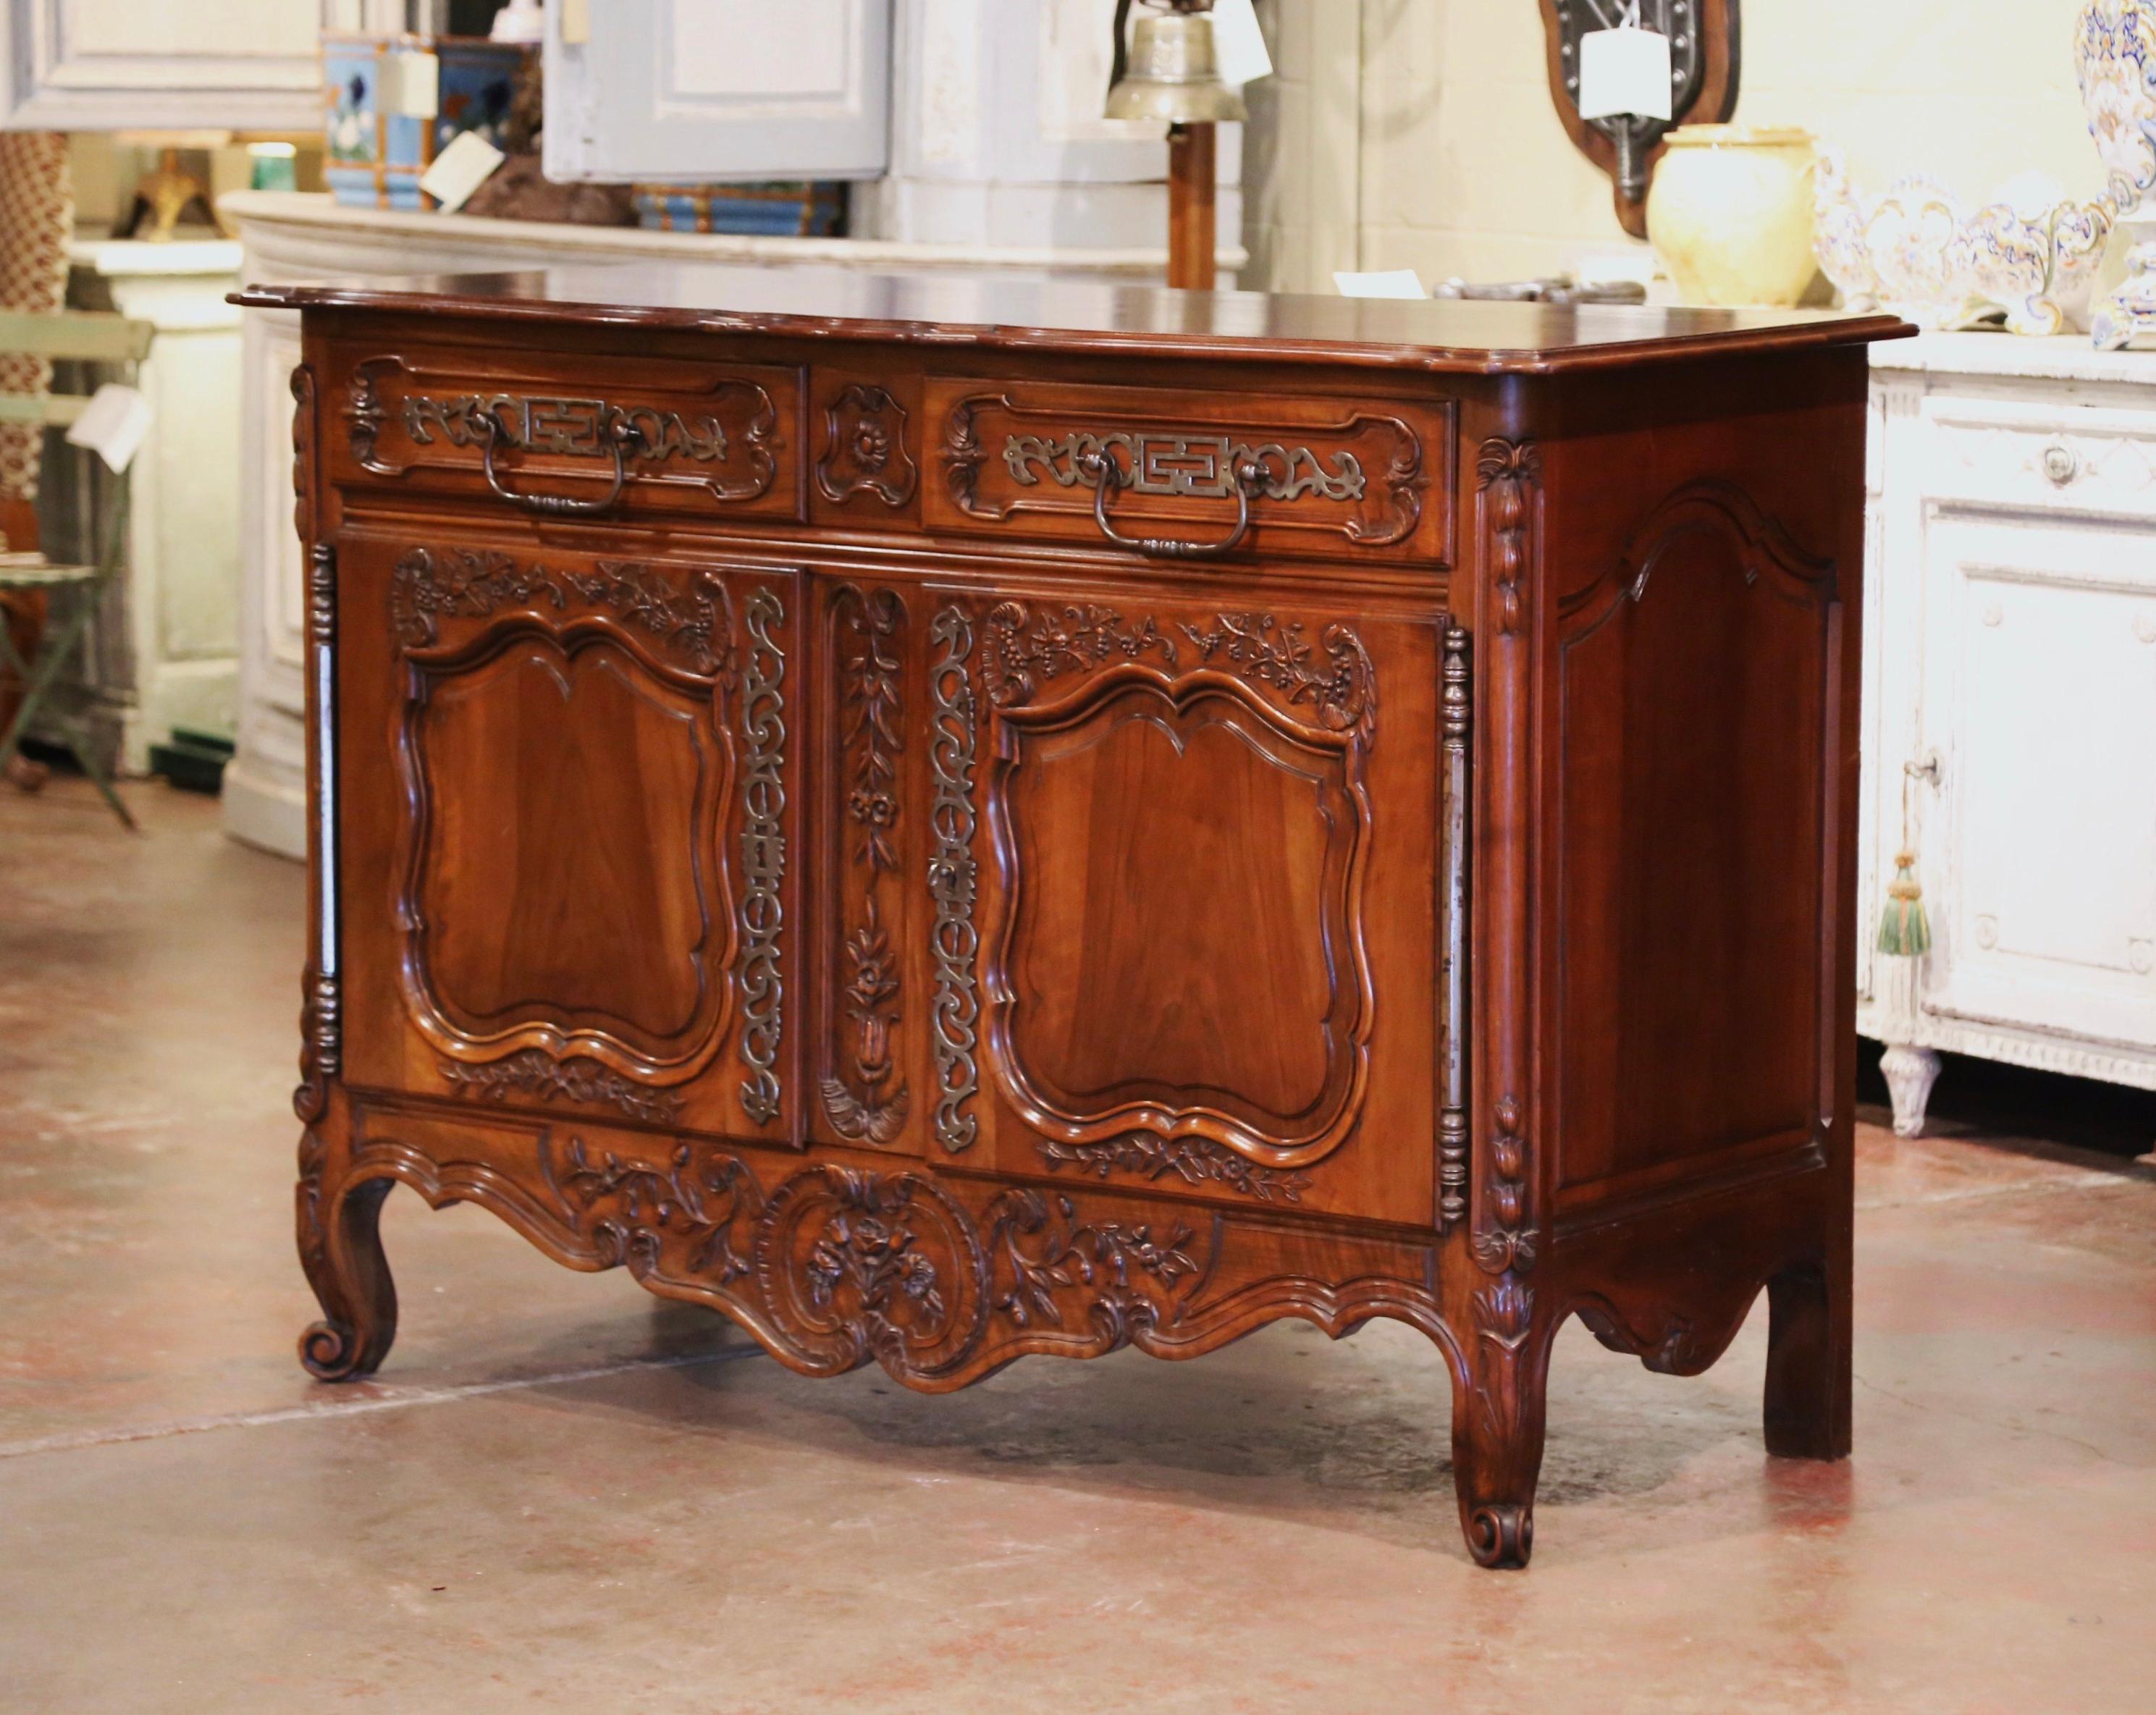 This elegant, antique fruit wood sideboard was carved in Southern France, circa 1880. The Classic cabinet exemplifies the Louis XV style with a heavy presence, dramatic lines and intricate floral and foliage carvings throughout. The cabinet stands